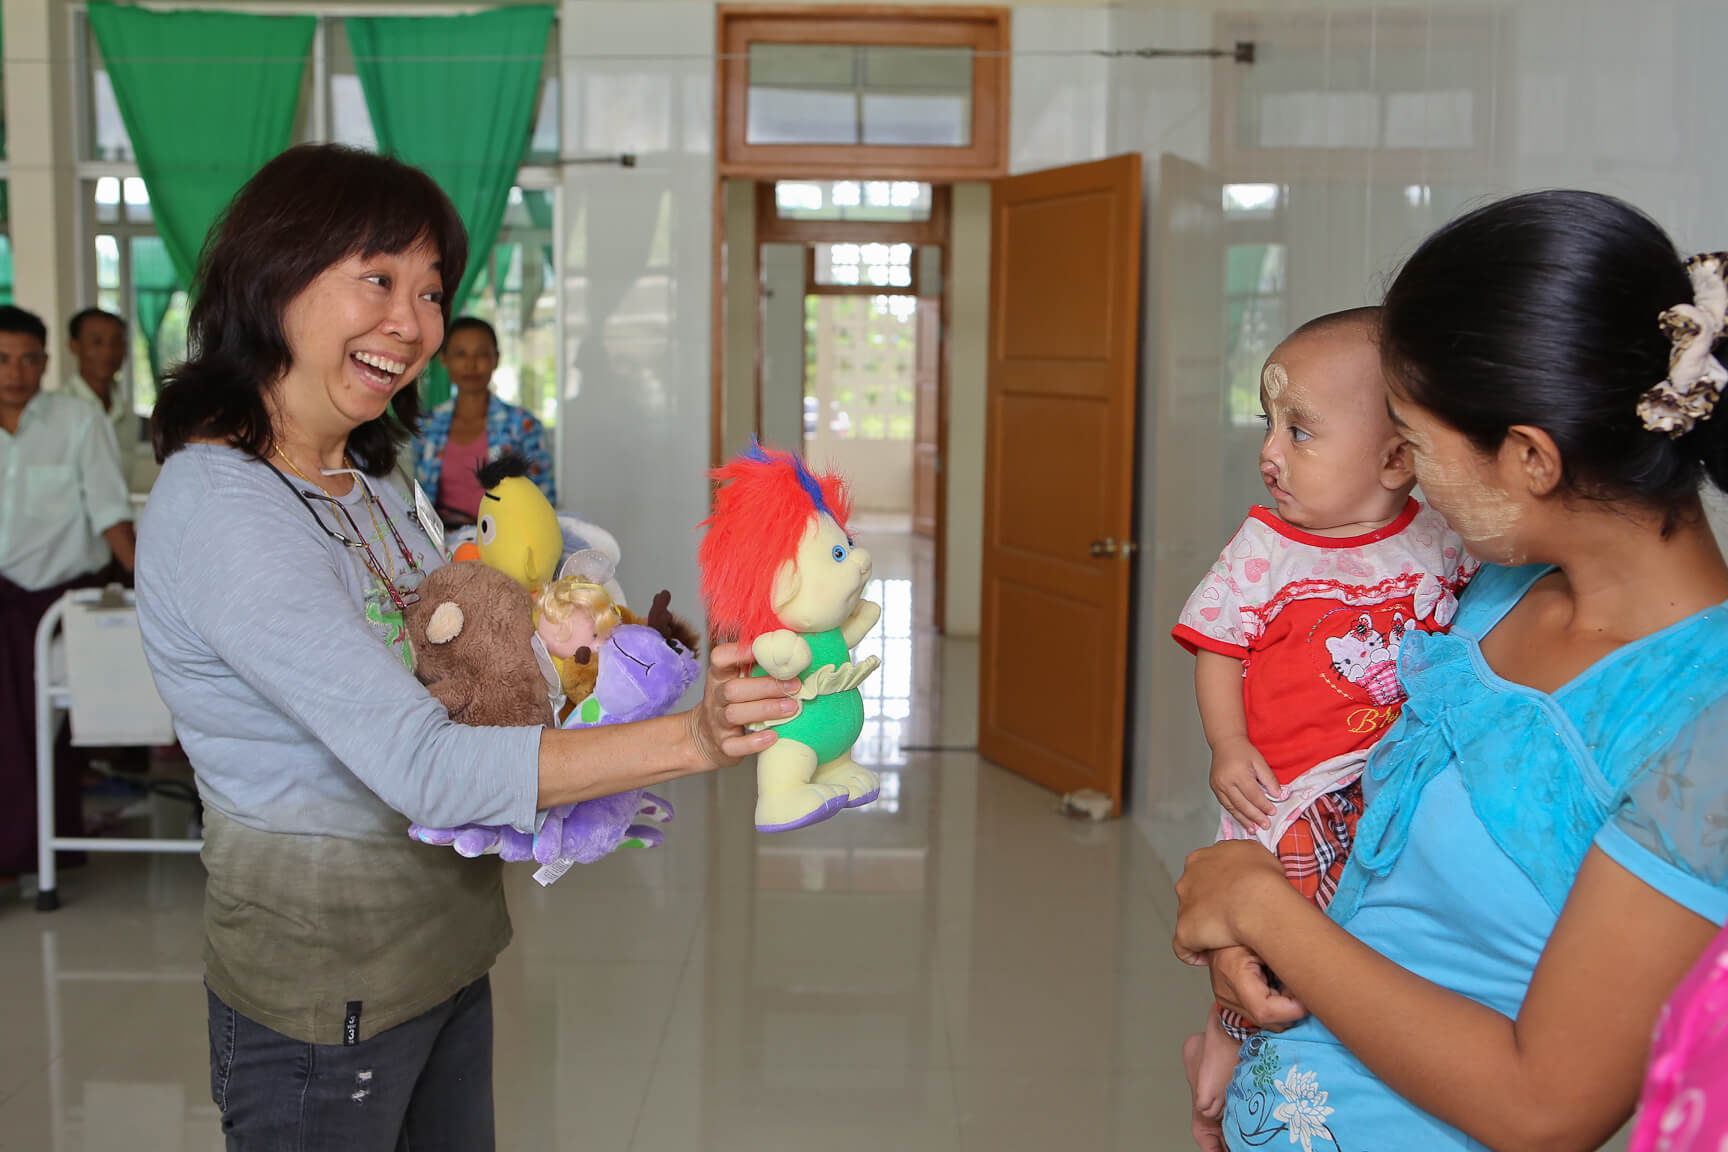 Surgeries begin with Rotaplast Volunteers at the Retired Service Personnel Hospital in Nay Pyi Taw, Myanmar.